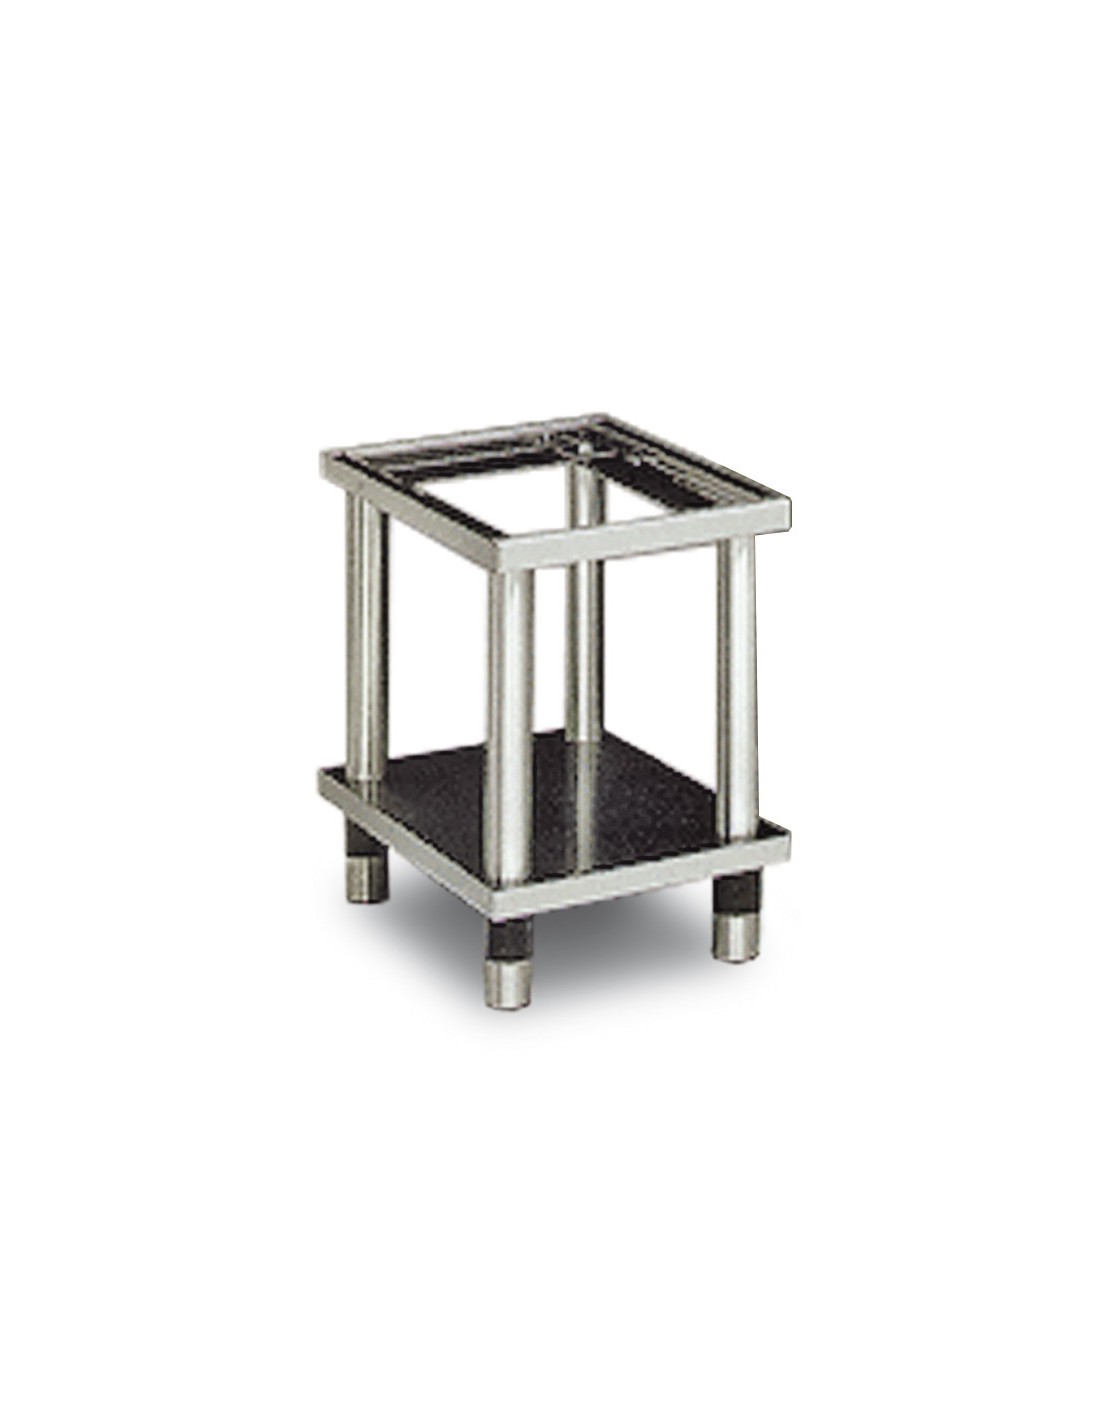 Base stand -Dimensions cm 80 x 48,5 x 57 h